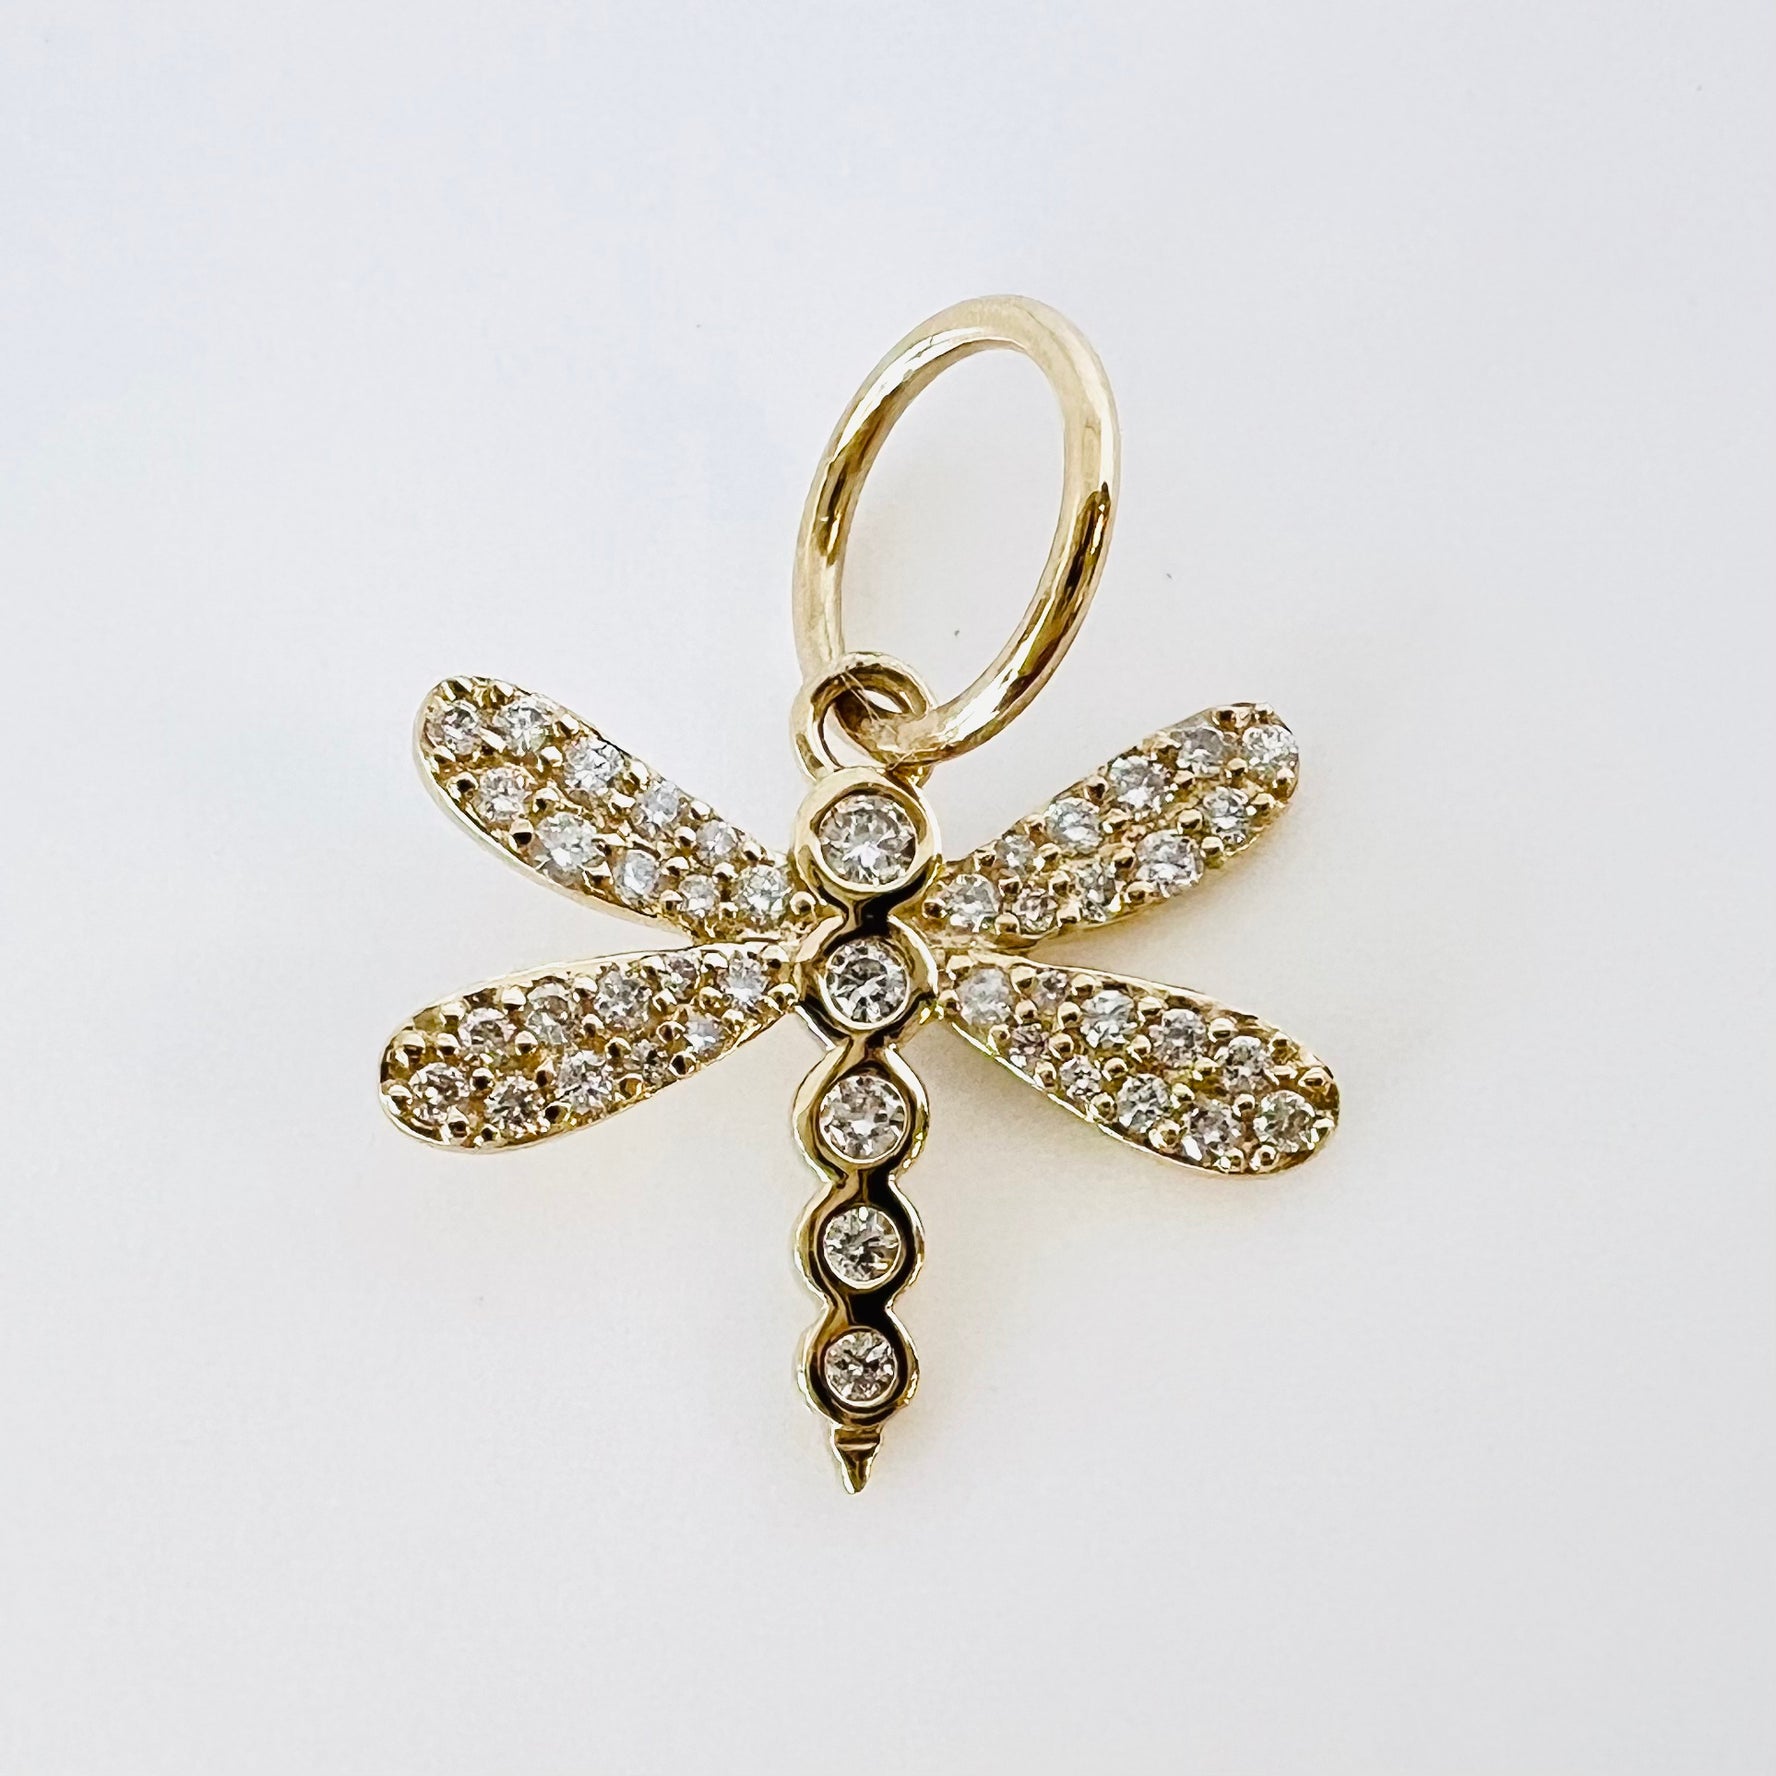 14k gold and diamond dragonfly pendant/ charm